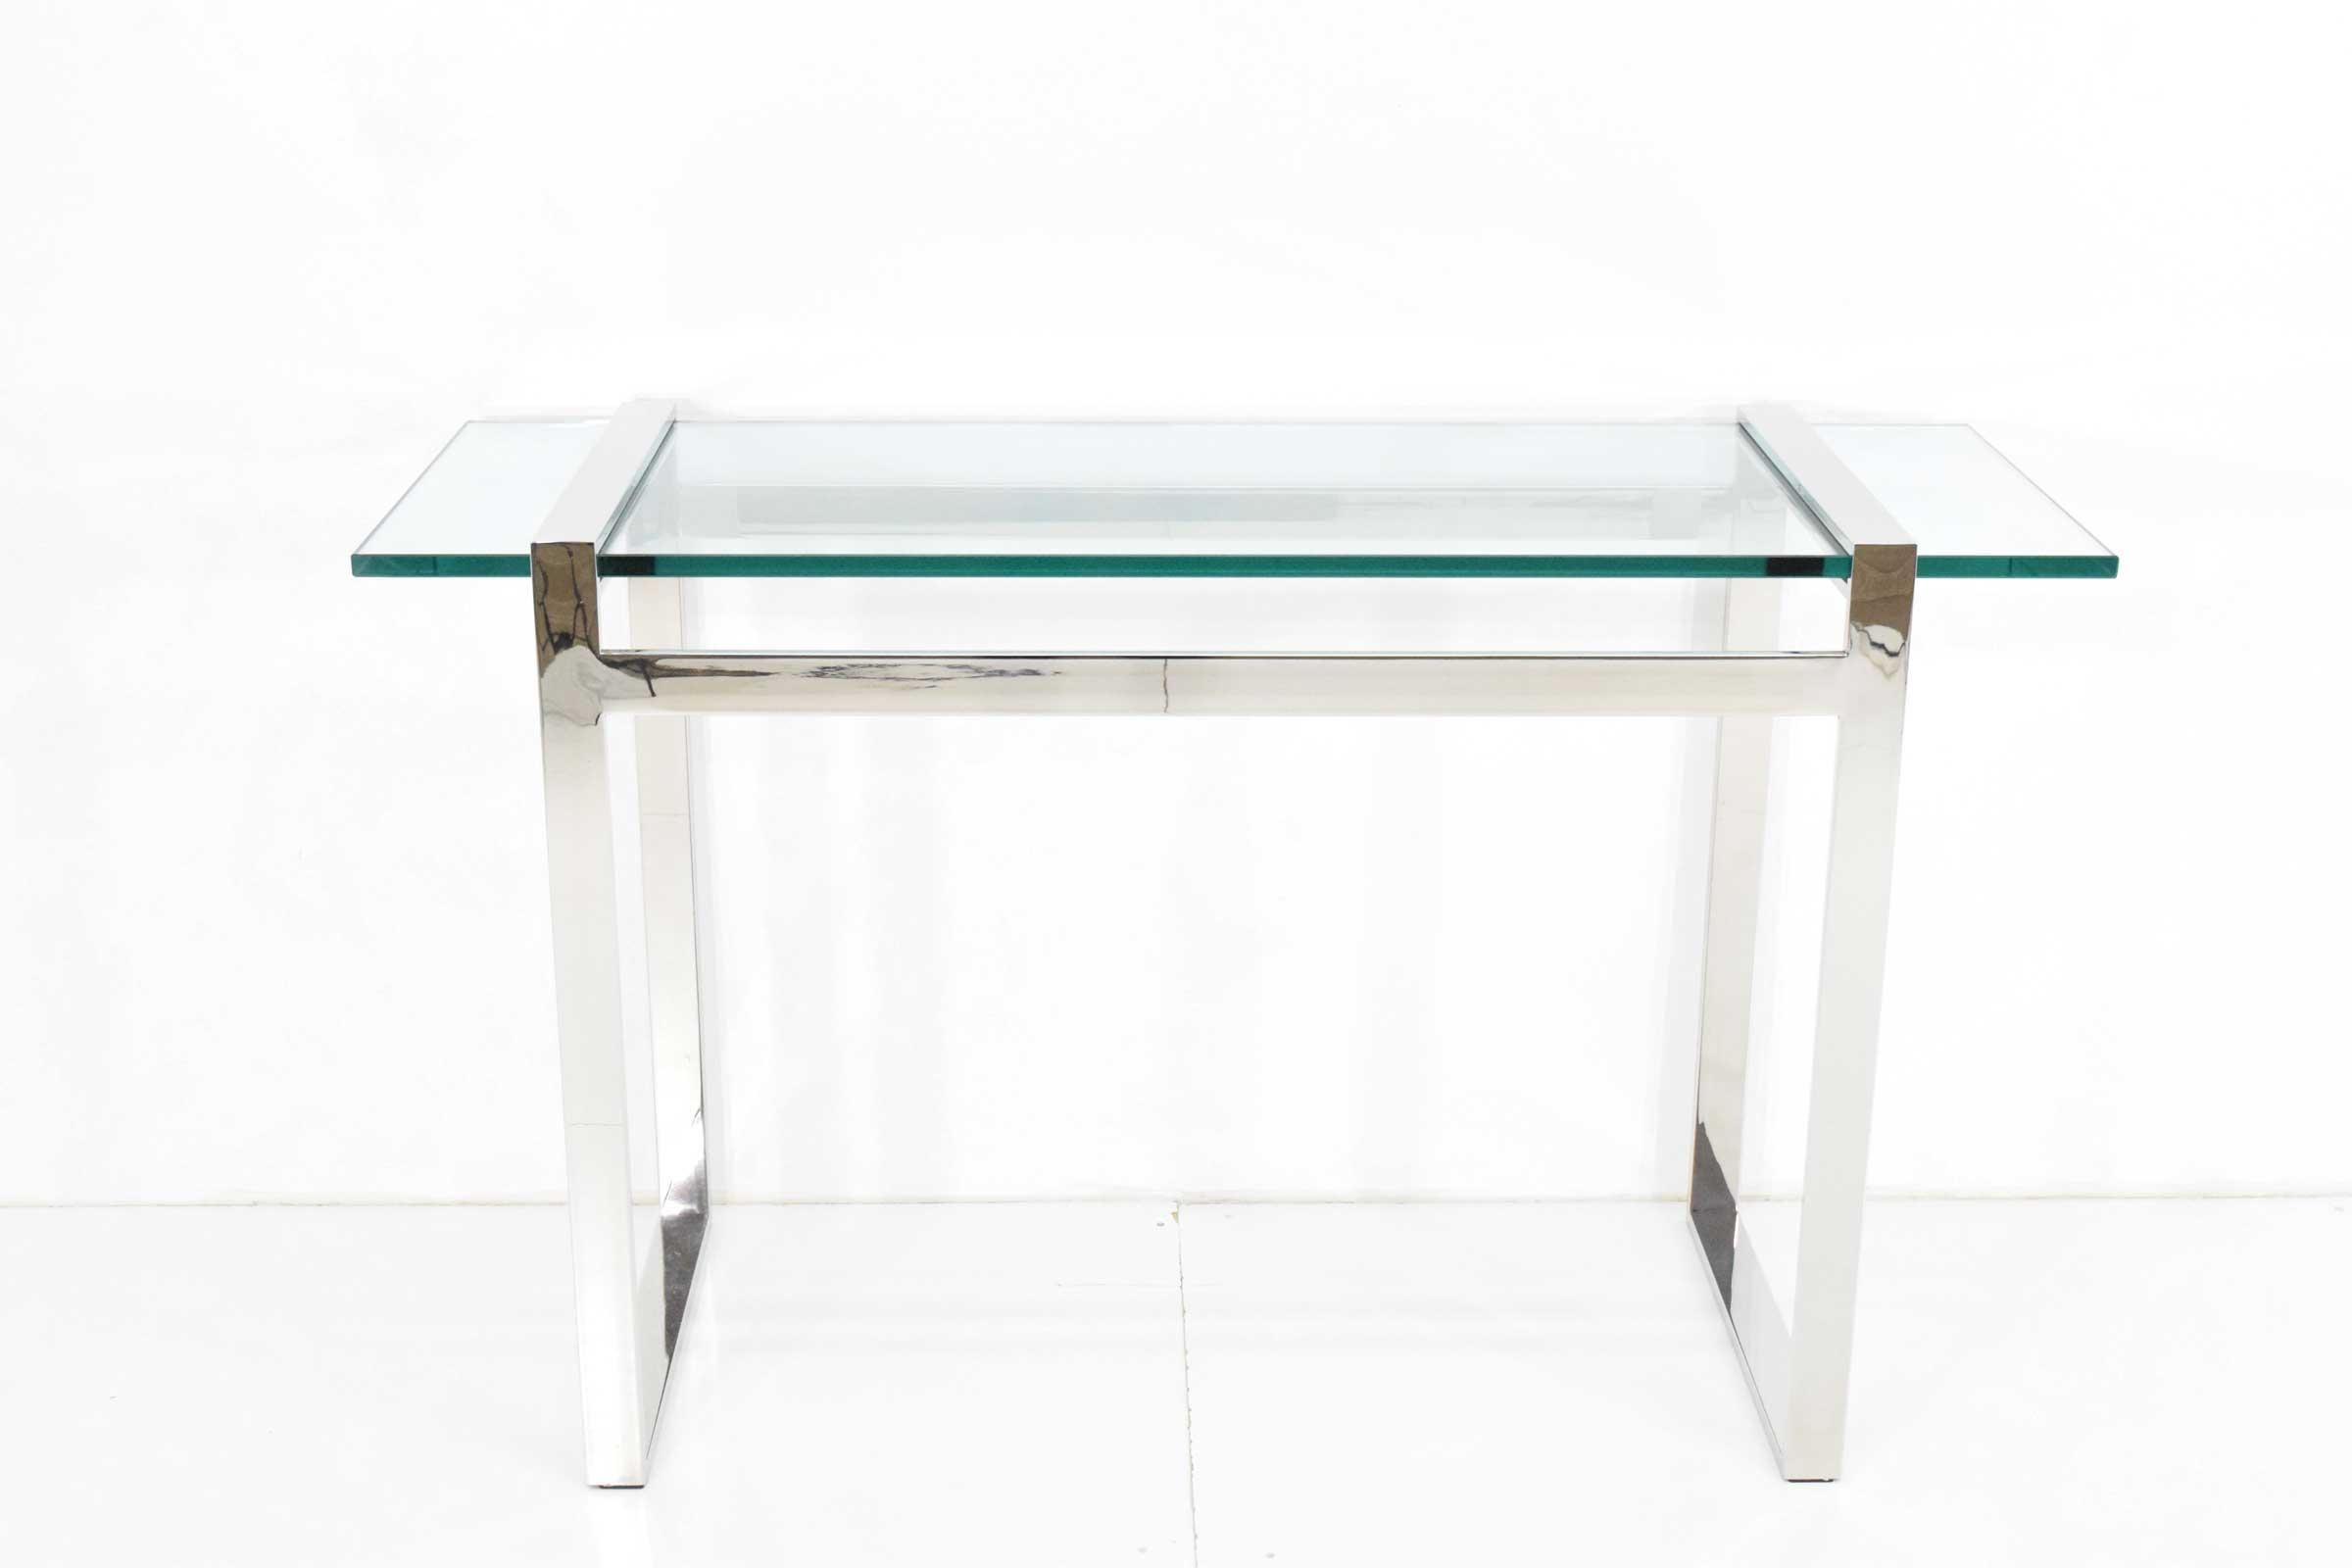 By Cy Mann and in style of Milo Baughman. Thick glass top is inserted through chrome frame. Corners are all finely fabricated so no seams. Great quality!.